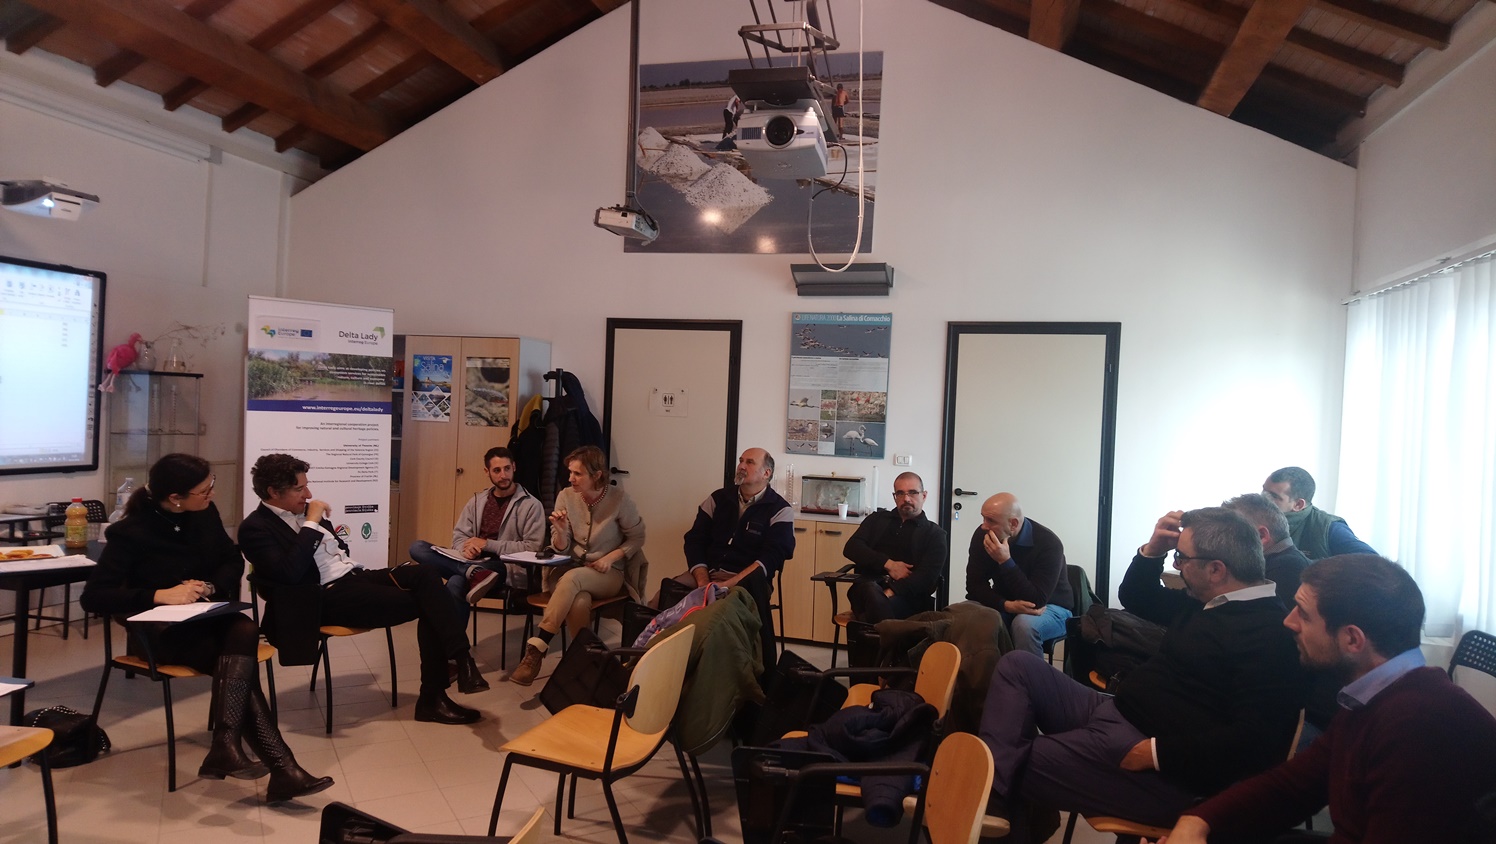 The 1st Regional Stakeholder Group Meeting in Italy